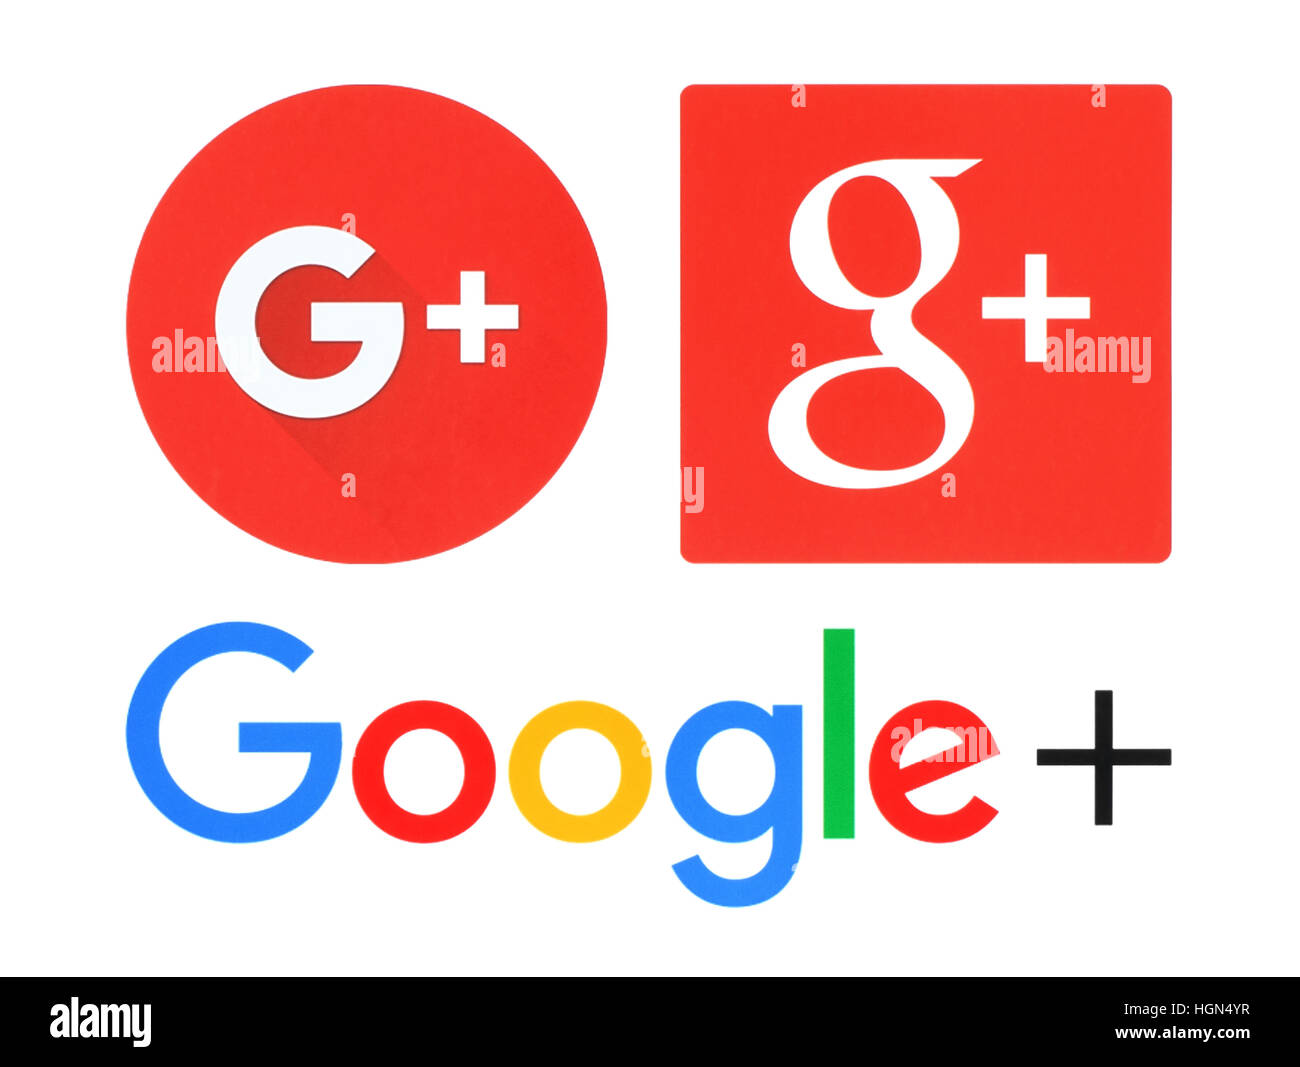 Kiev, Ukraine - June 03, 2016: Collection of popular social media Google plus logos printed on white paper. Google plus is a social network that is ow Stock Photo